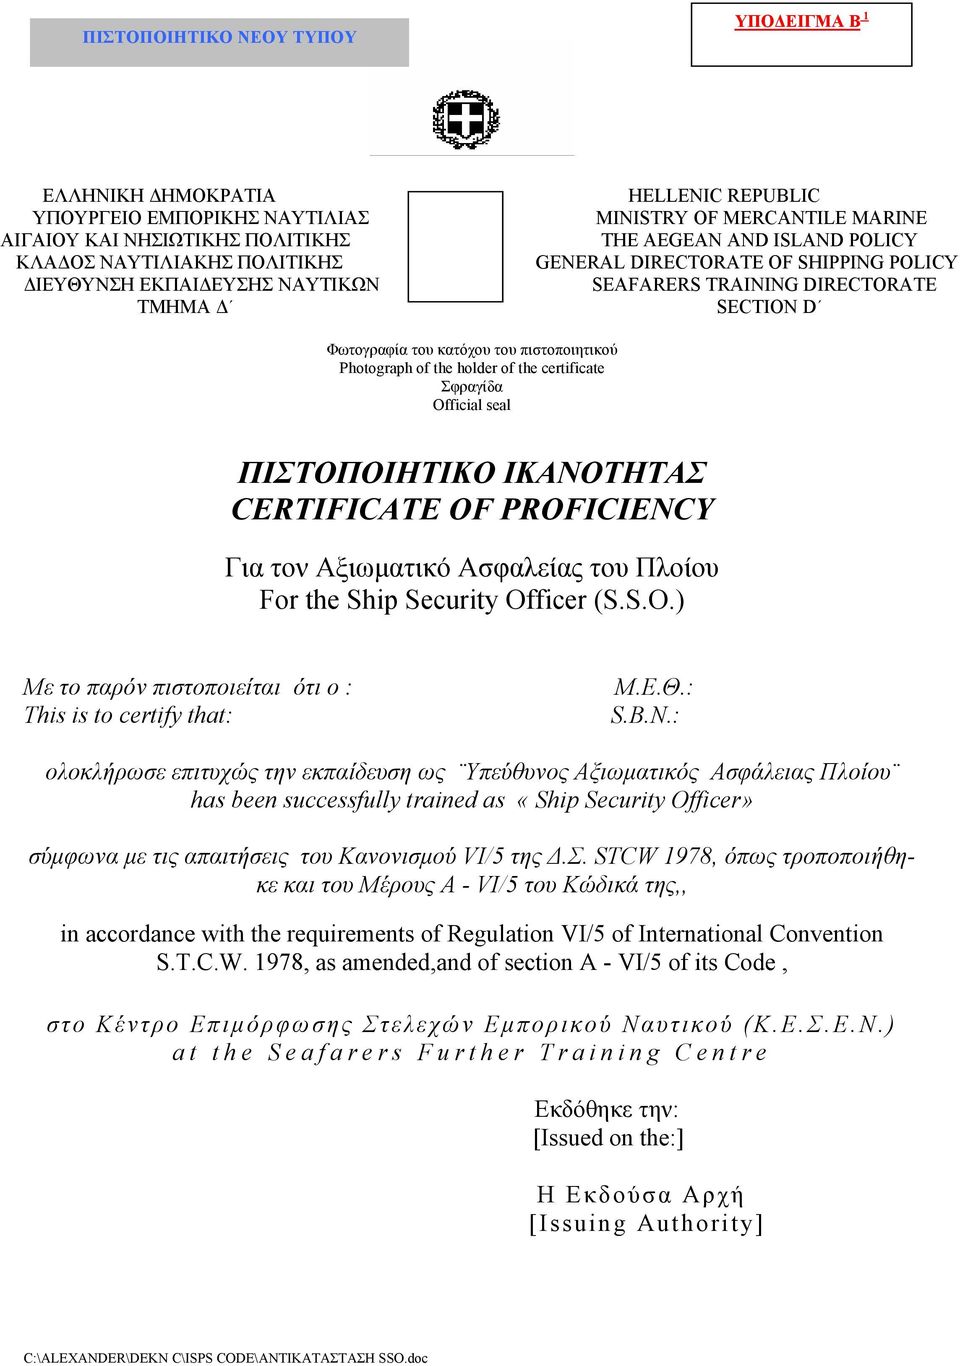 Photograph of the holder of the certificate Σφραγίδα Official seal ΠΙΣΤΟΠΟΙΗΤΙΚΟ ΙΚΑΝΟΤΗΤΑΣ CERTIFICATE OF PROFICIENCY Για τον Αξιωµατικό Ασφαλείας του Πλοίου For the Ship Security Officer (S.S.O.) Με το παρόν πιστοποιείται ότι ο : This is to certify that: Μ.